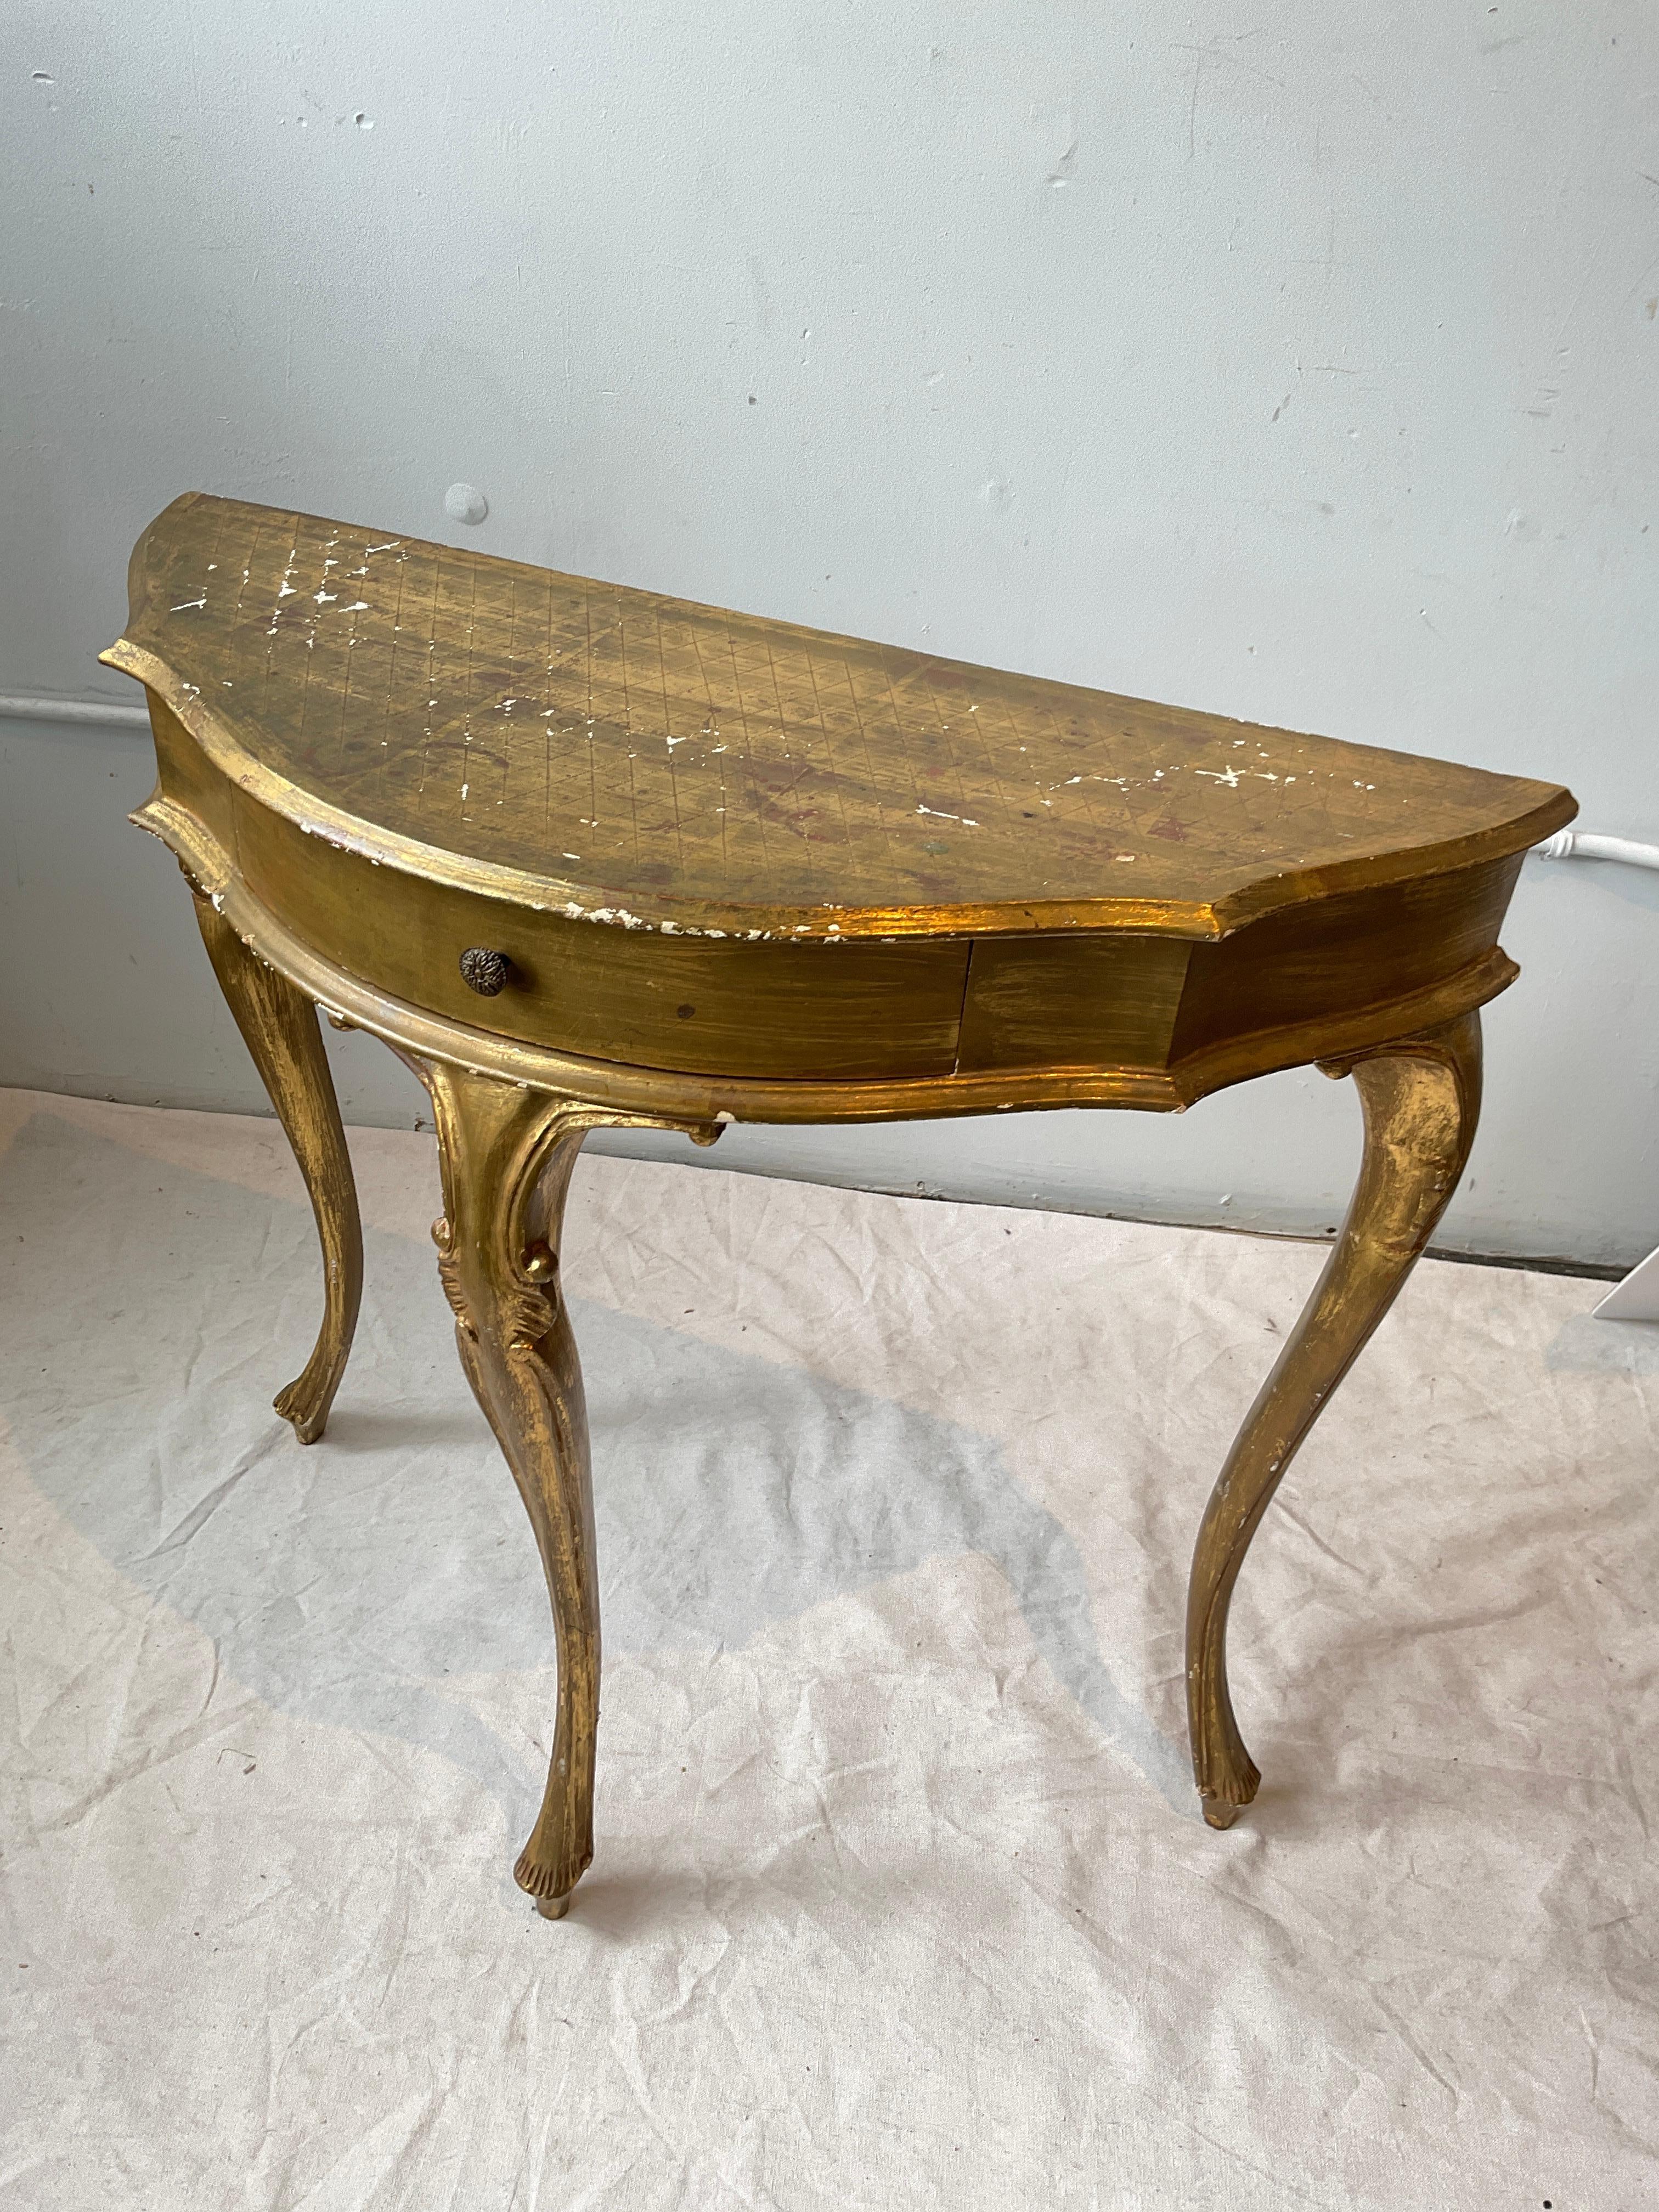 1960s Italian gilt wood console. Wear to finish as shown in pictures.